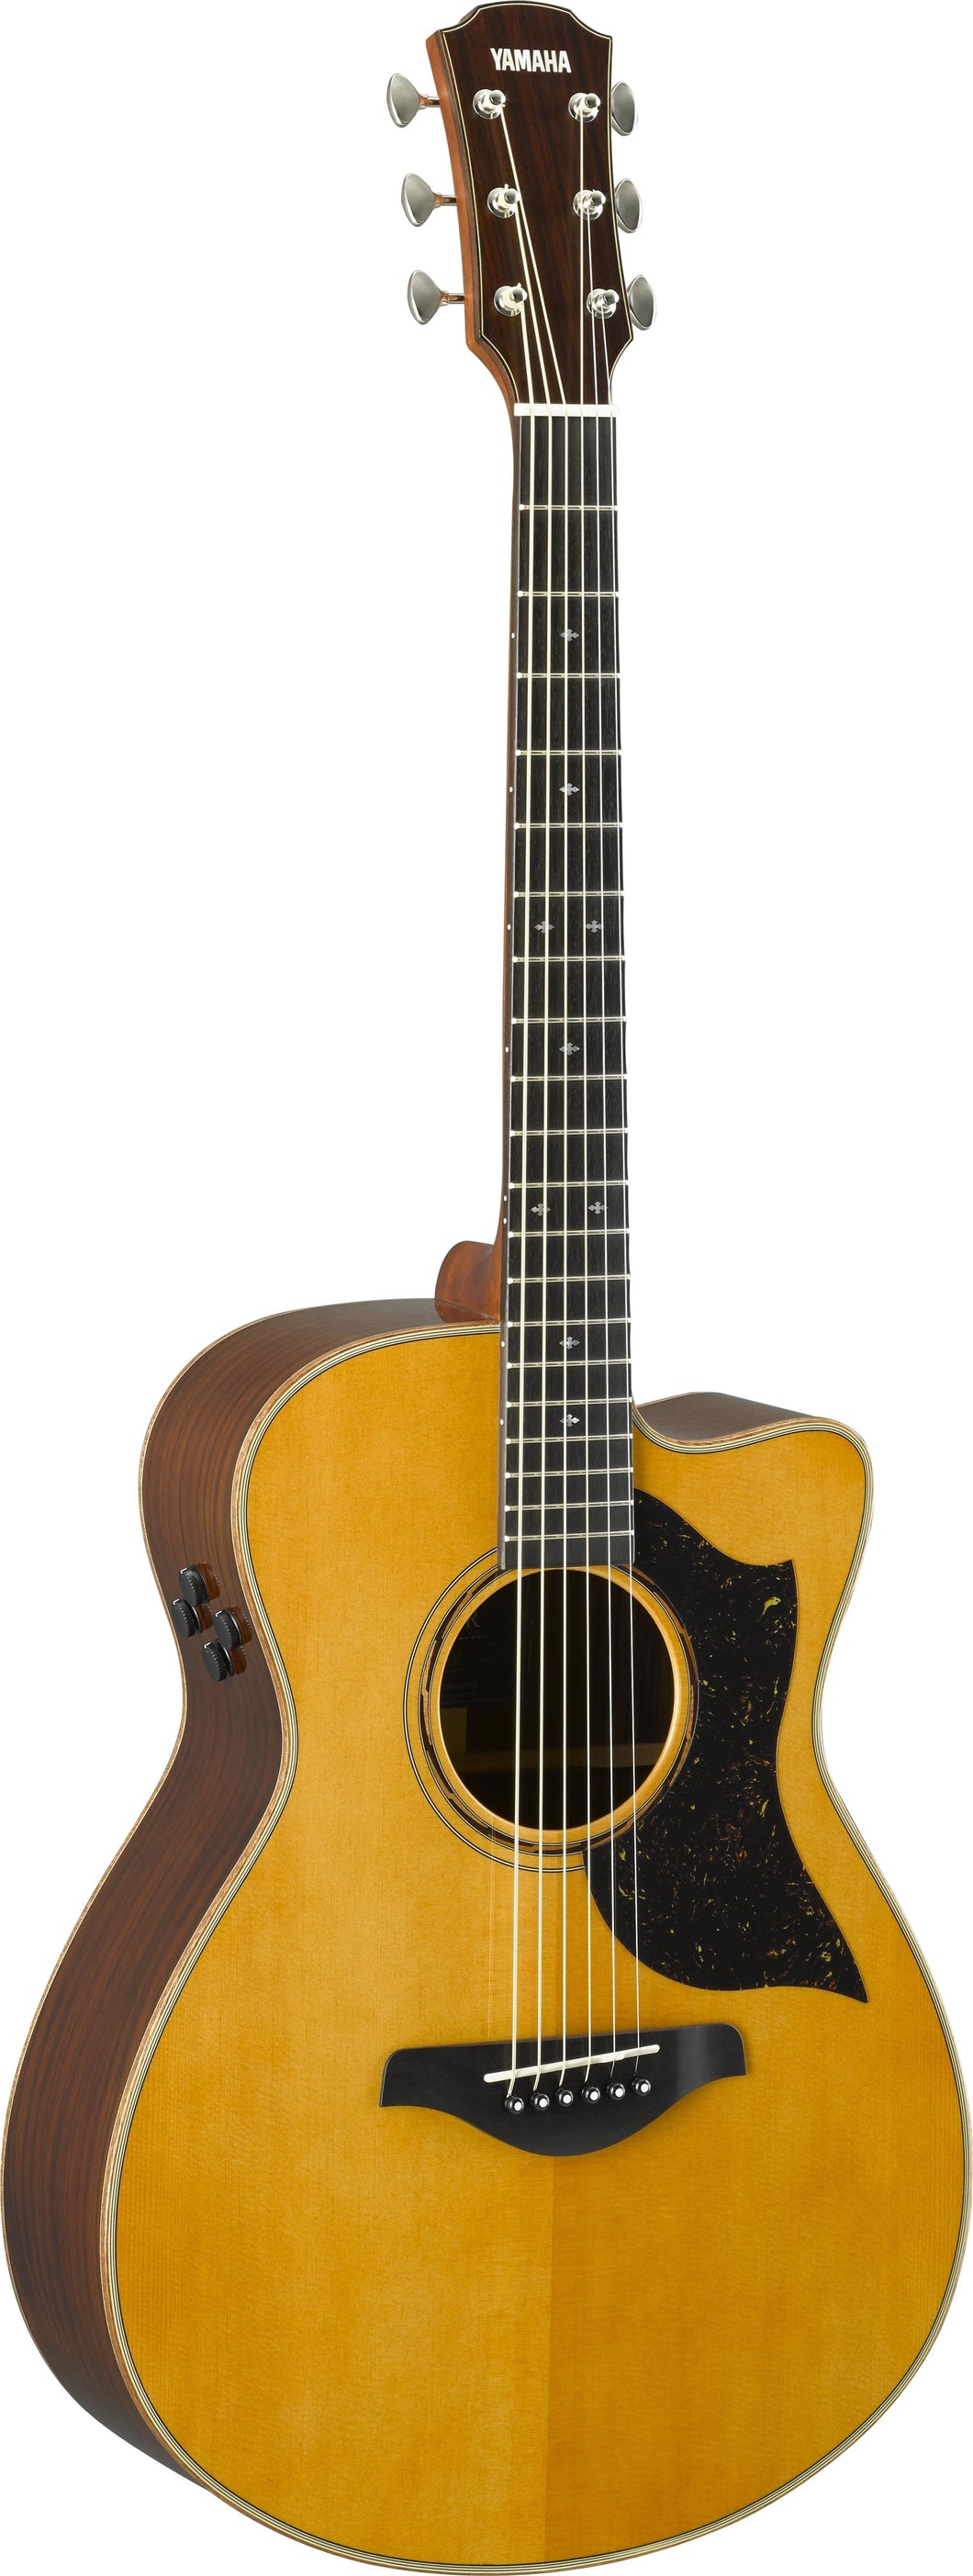 Yamaha AC5R Concert body with cutaway, solid Spruce top, solid Rosewood back and sides. Made in Japan